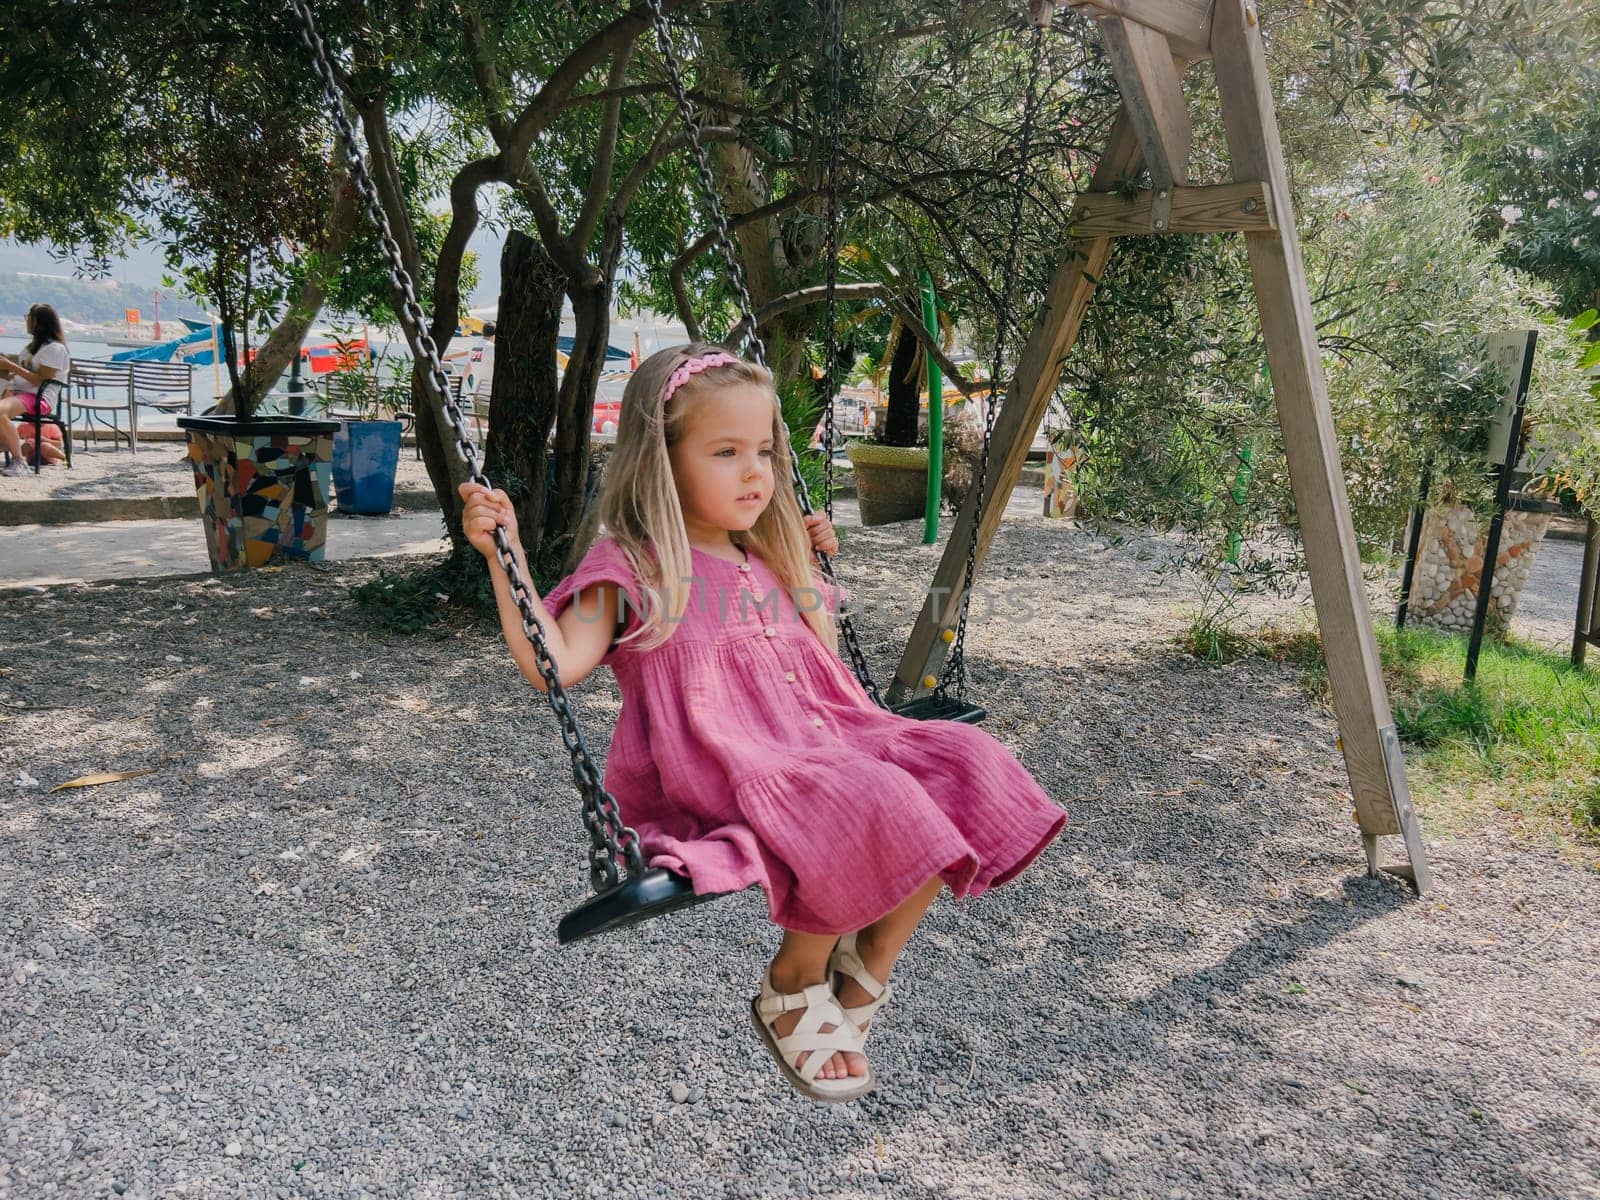 Little girl in a pink dress swings on a chain swing in the park by Nadtochiy